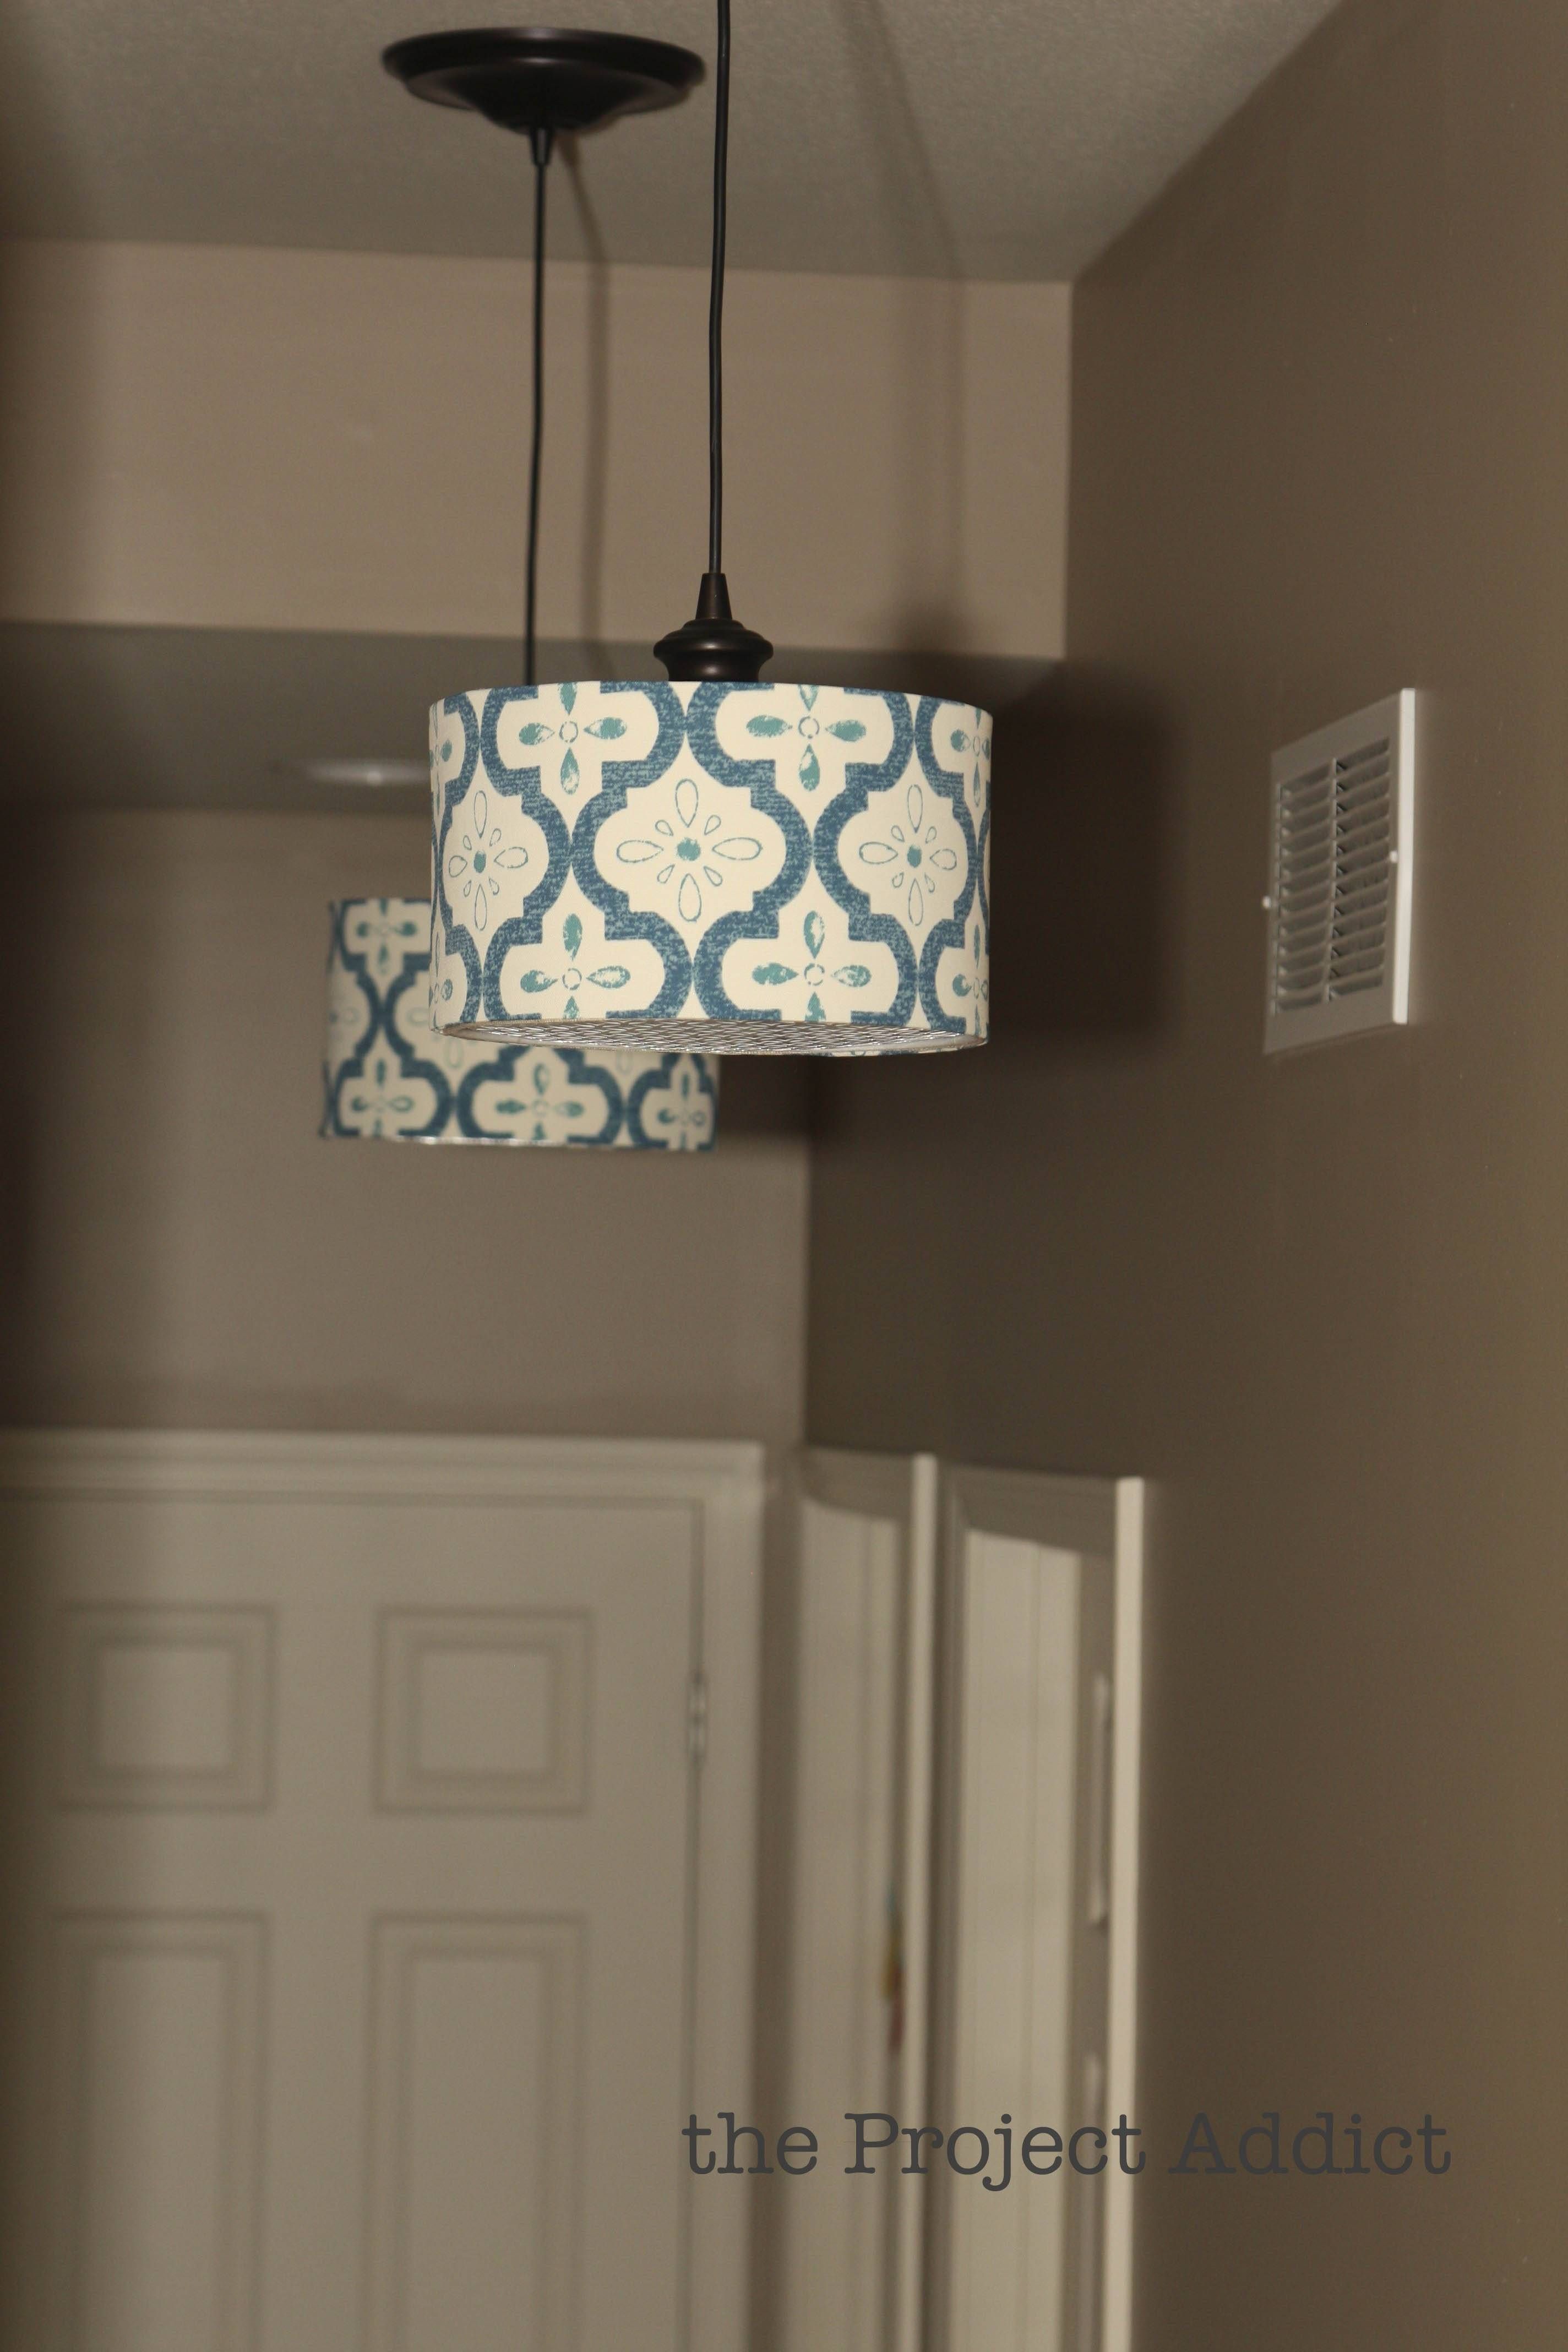 Decorating: Appealing Recessed Light Conversion Kit For Ceiling For Recessed Light To Pendant Lights (View 11 of 15)